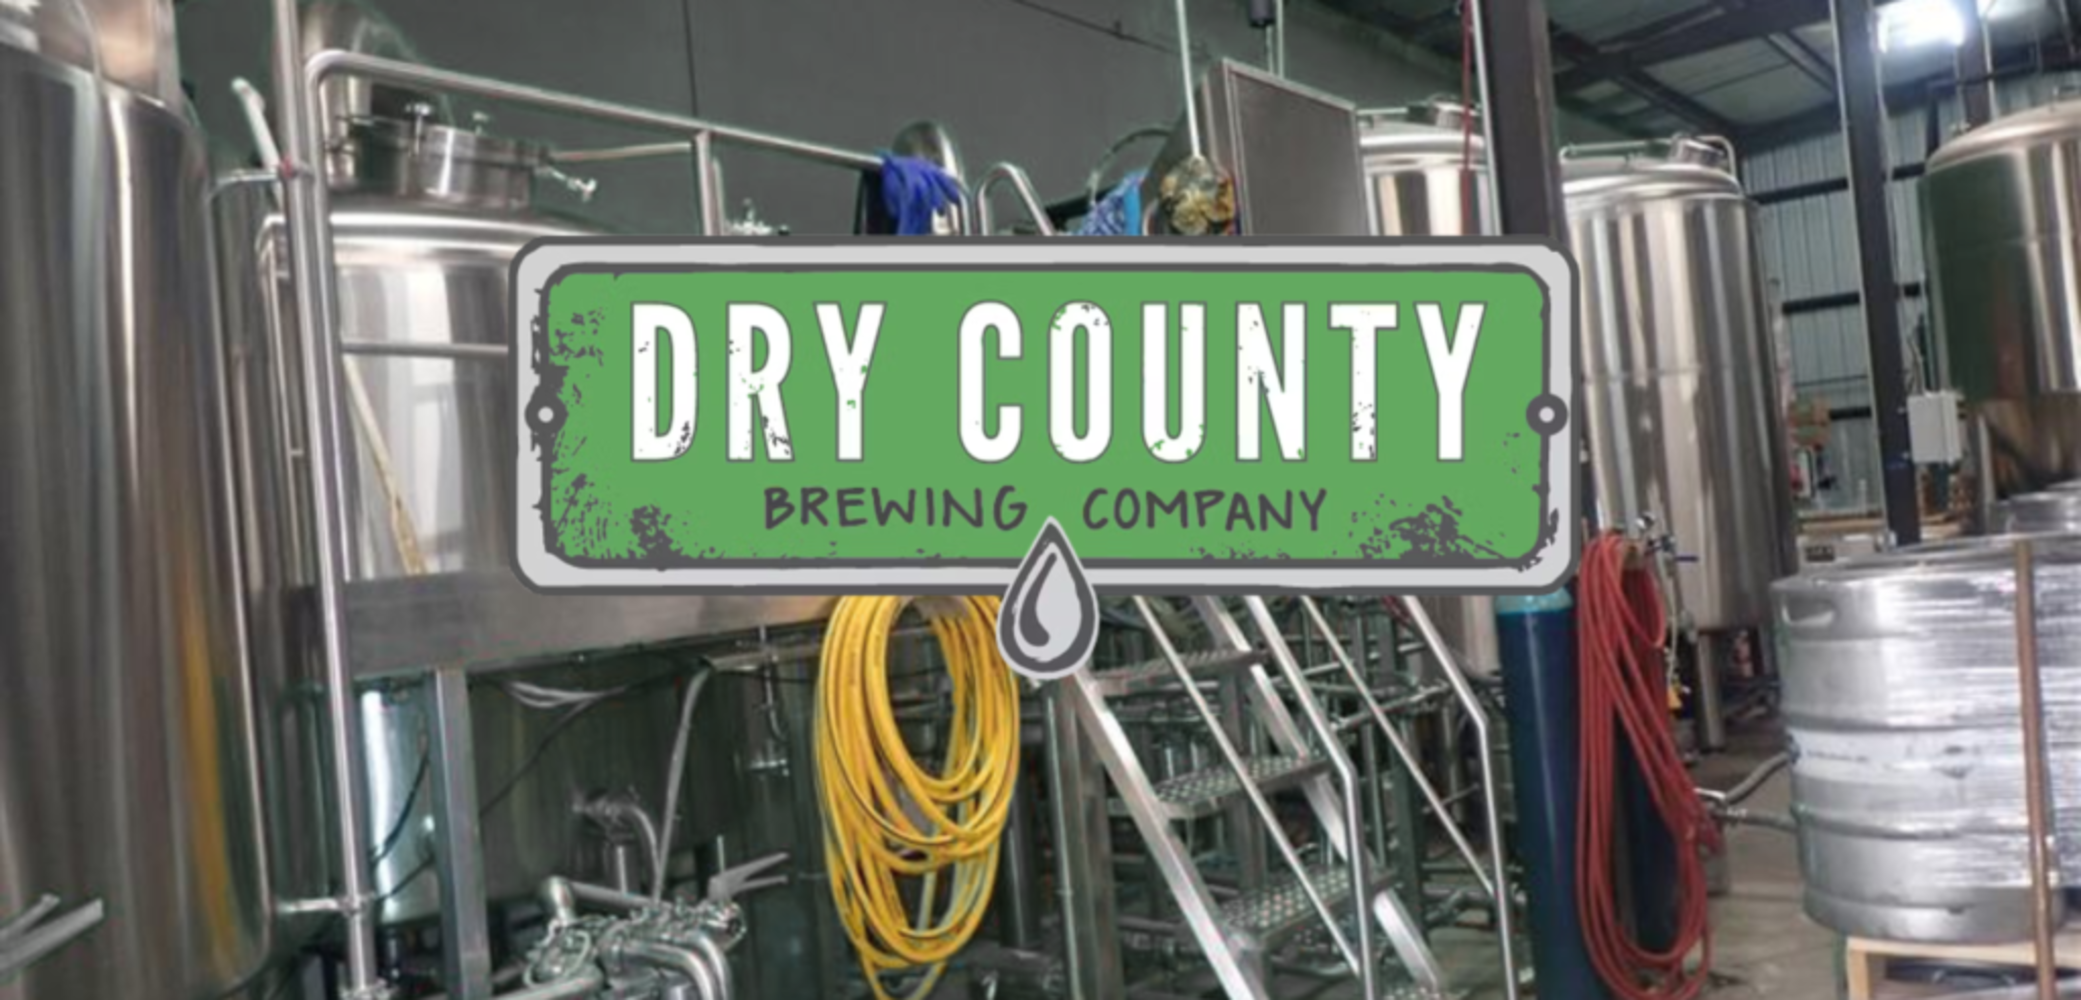 Dry County Brewing Company - Alpha 5 & 30 BBL Brewhouses, Fermenters, Brite Tanks, Wild Goose Can Line, Keg Washer, Chiller, Boiler & More